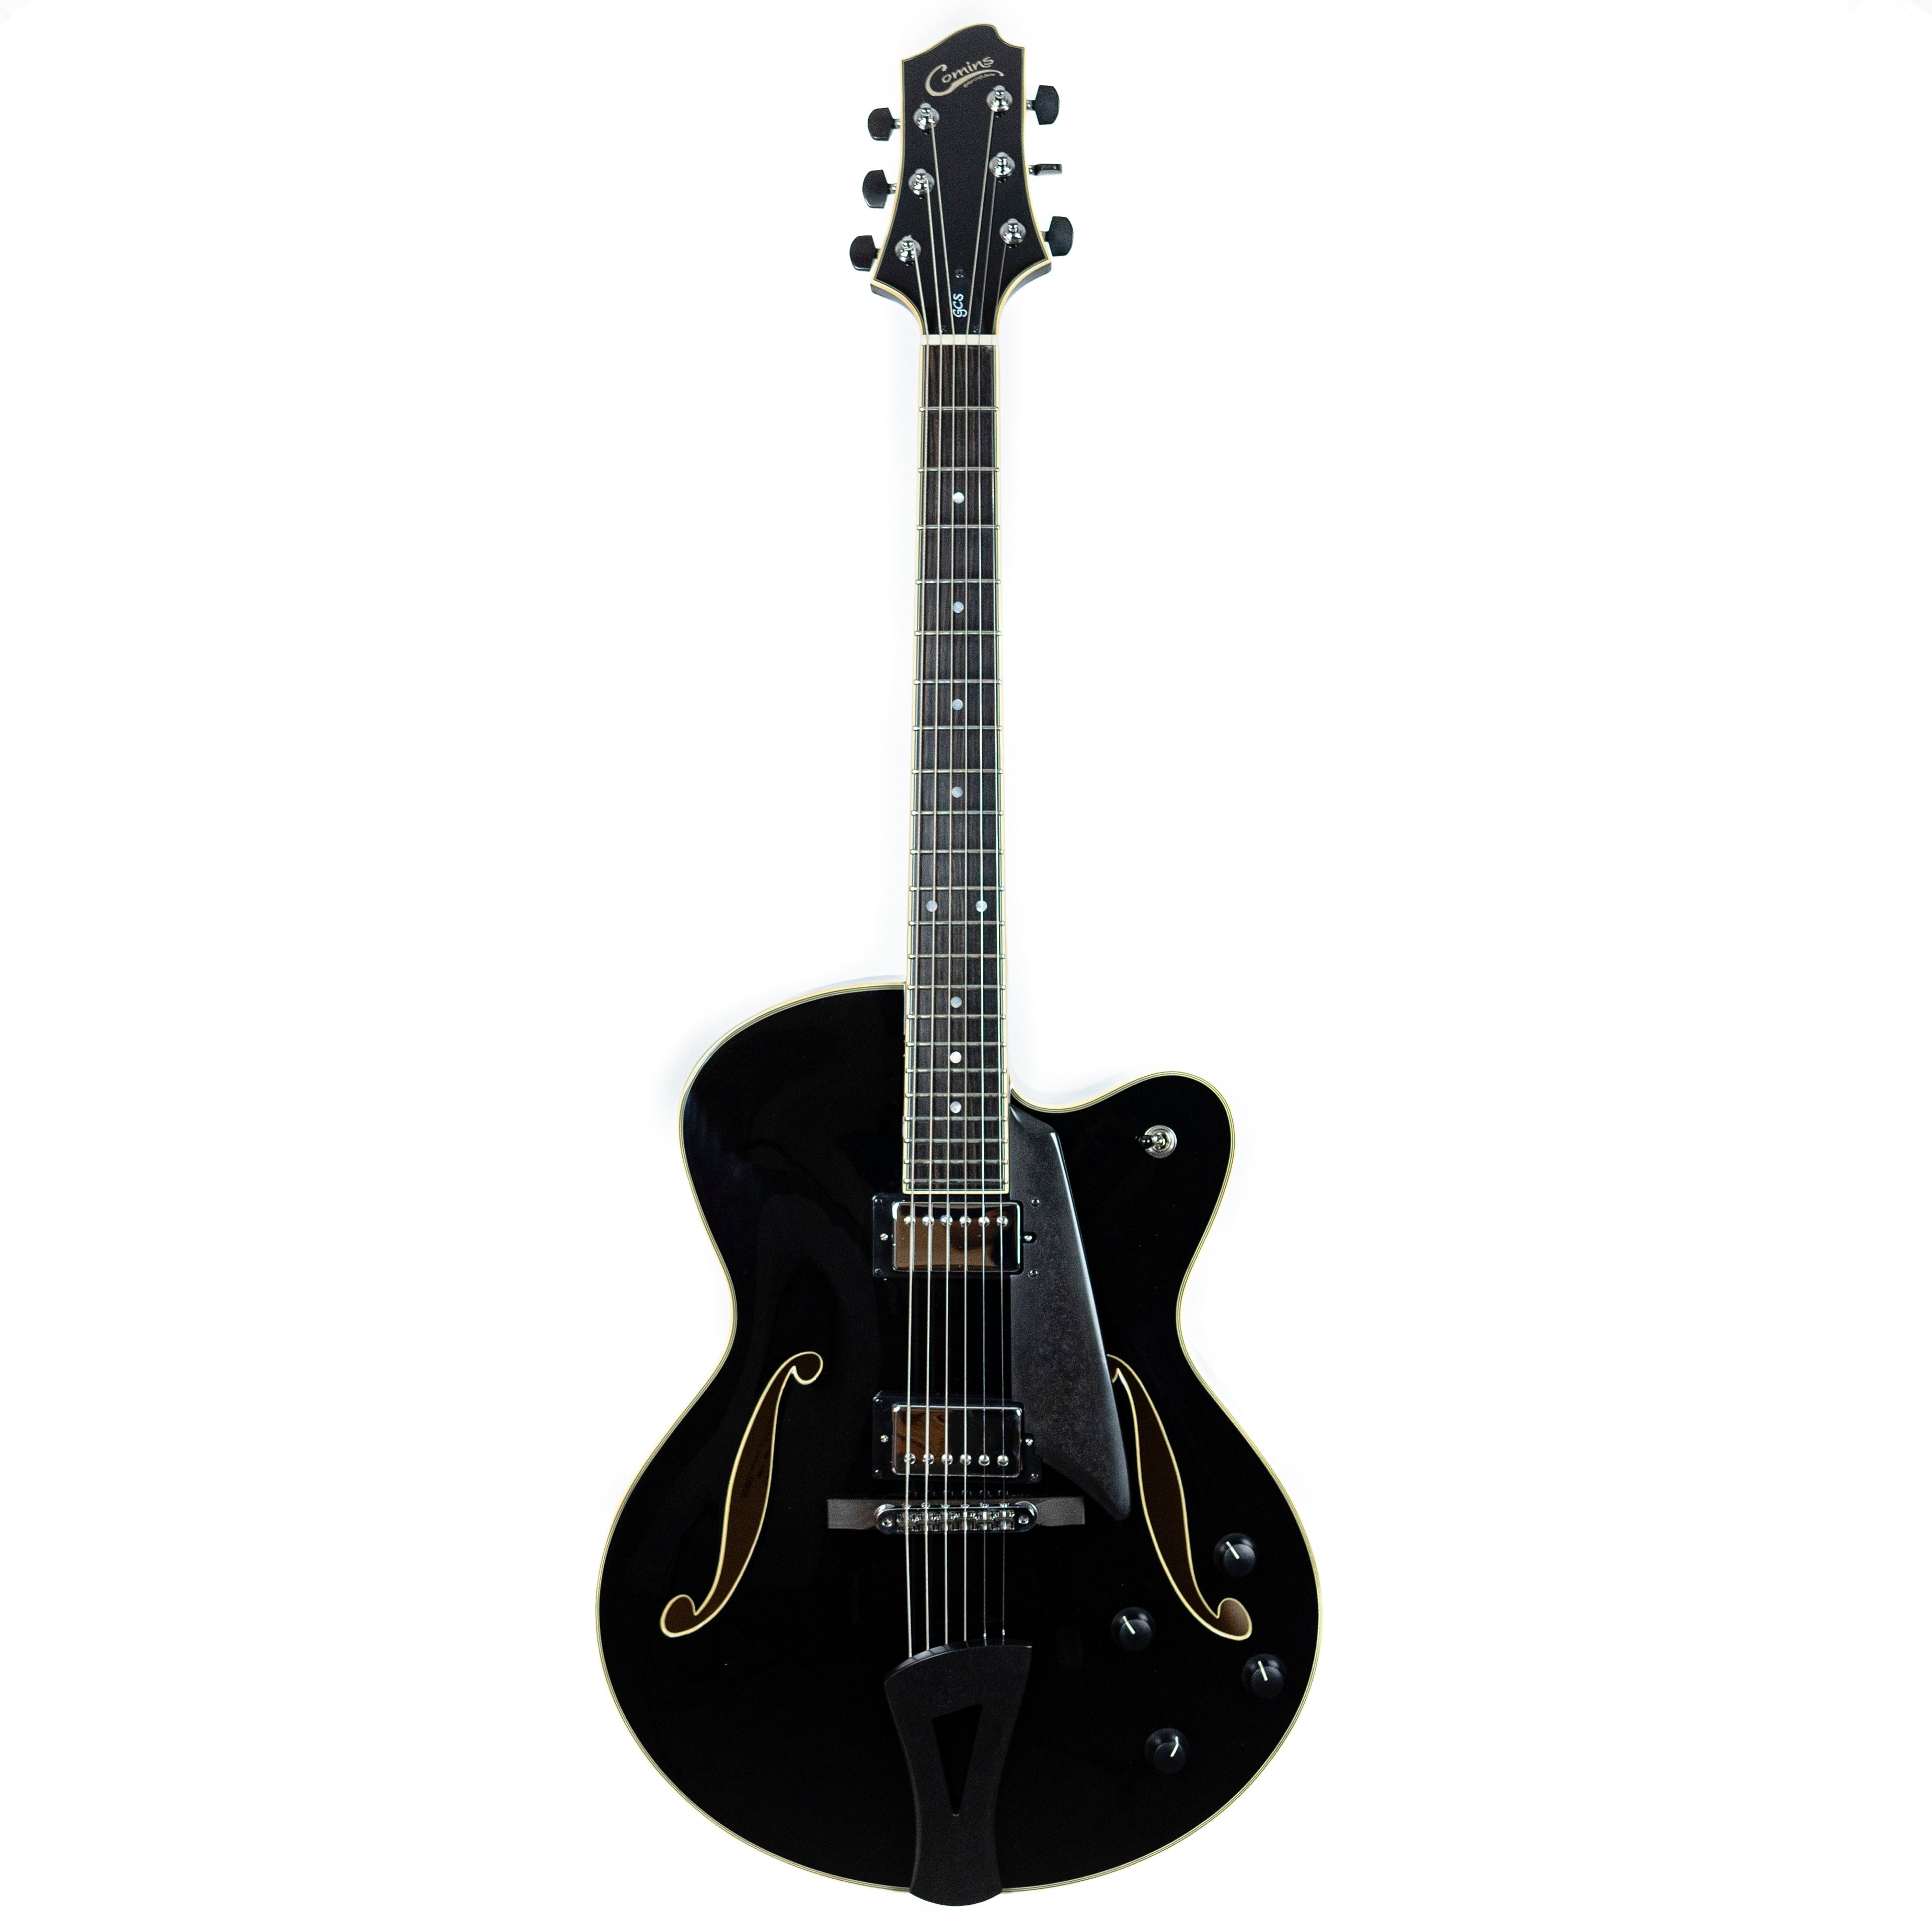 Comins GCS-16-2 Archtop in Black